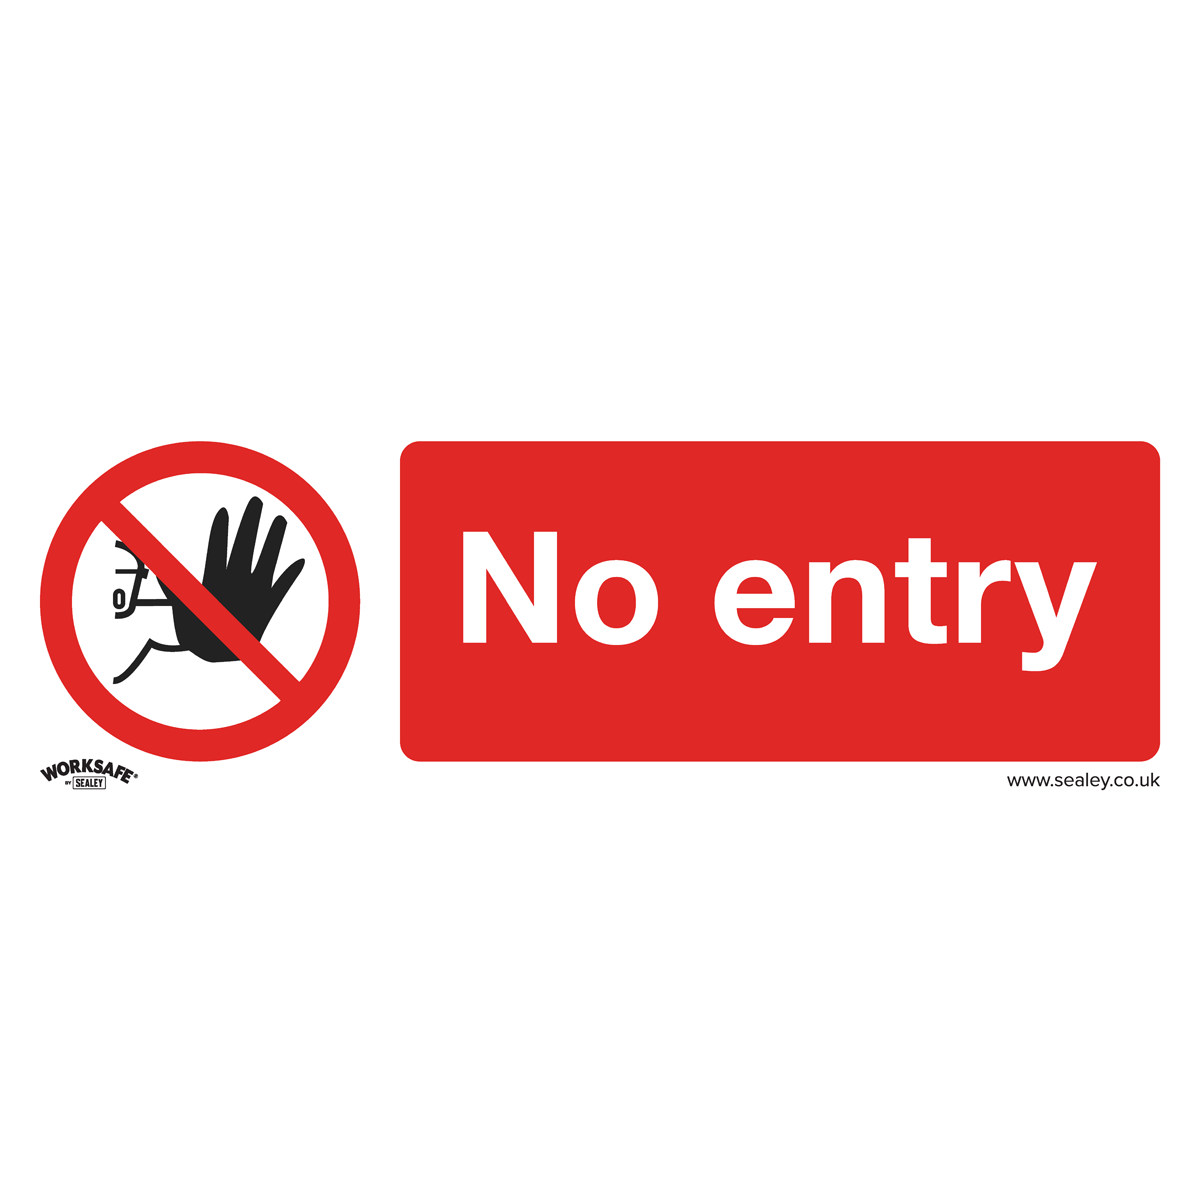 Sealey Prohibition Safety Sign - No Entry - Self-Adhesive Vinyl - Pack of 10